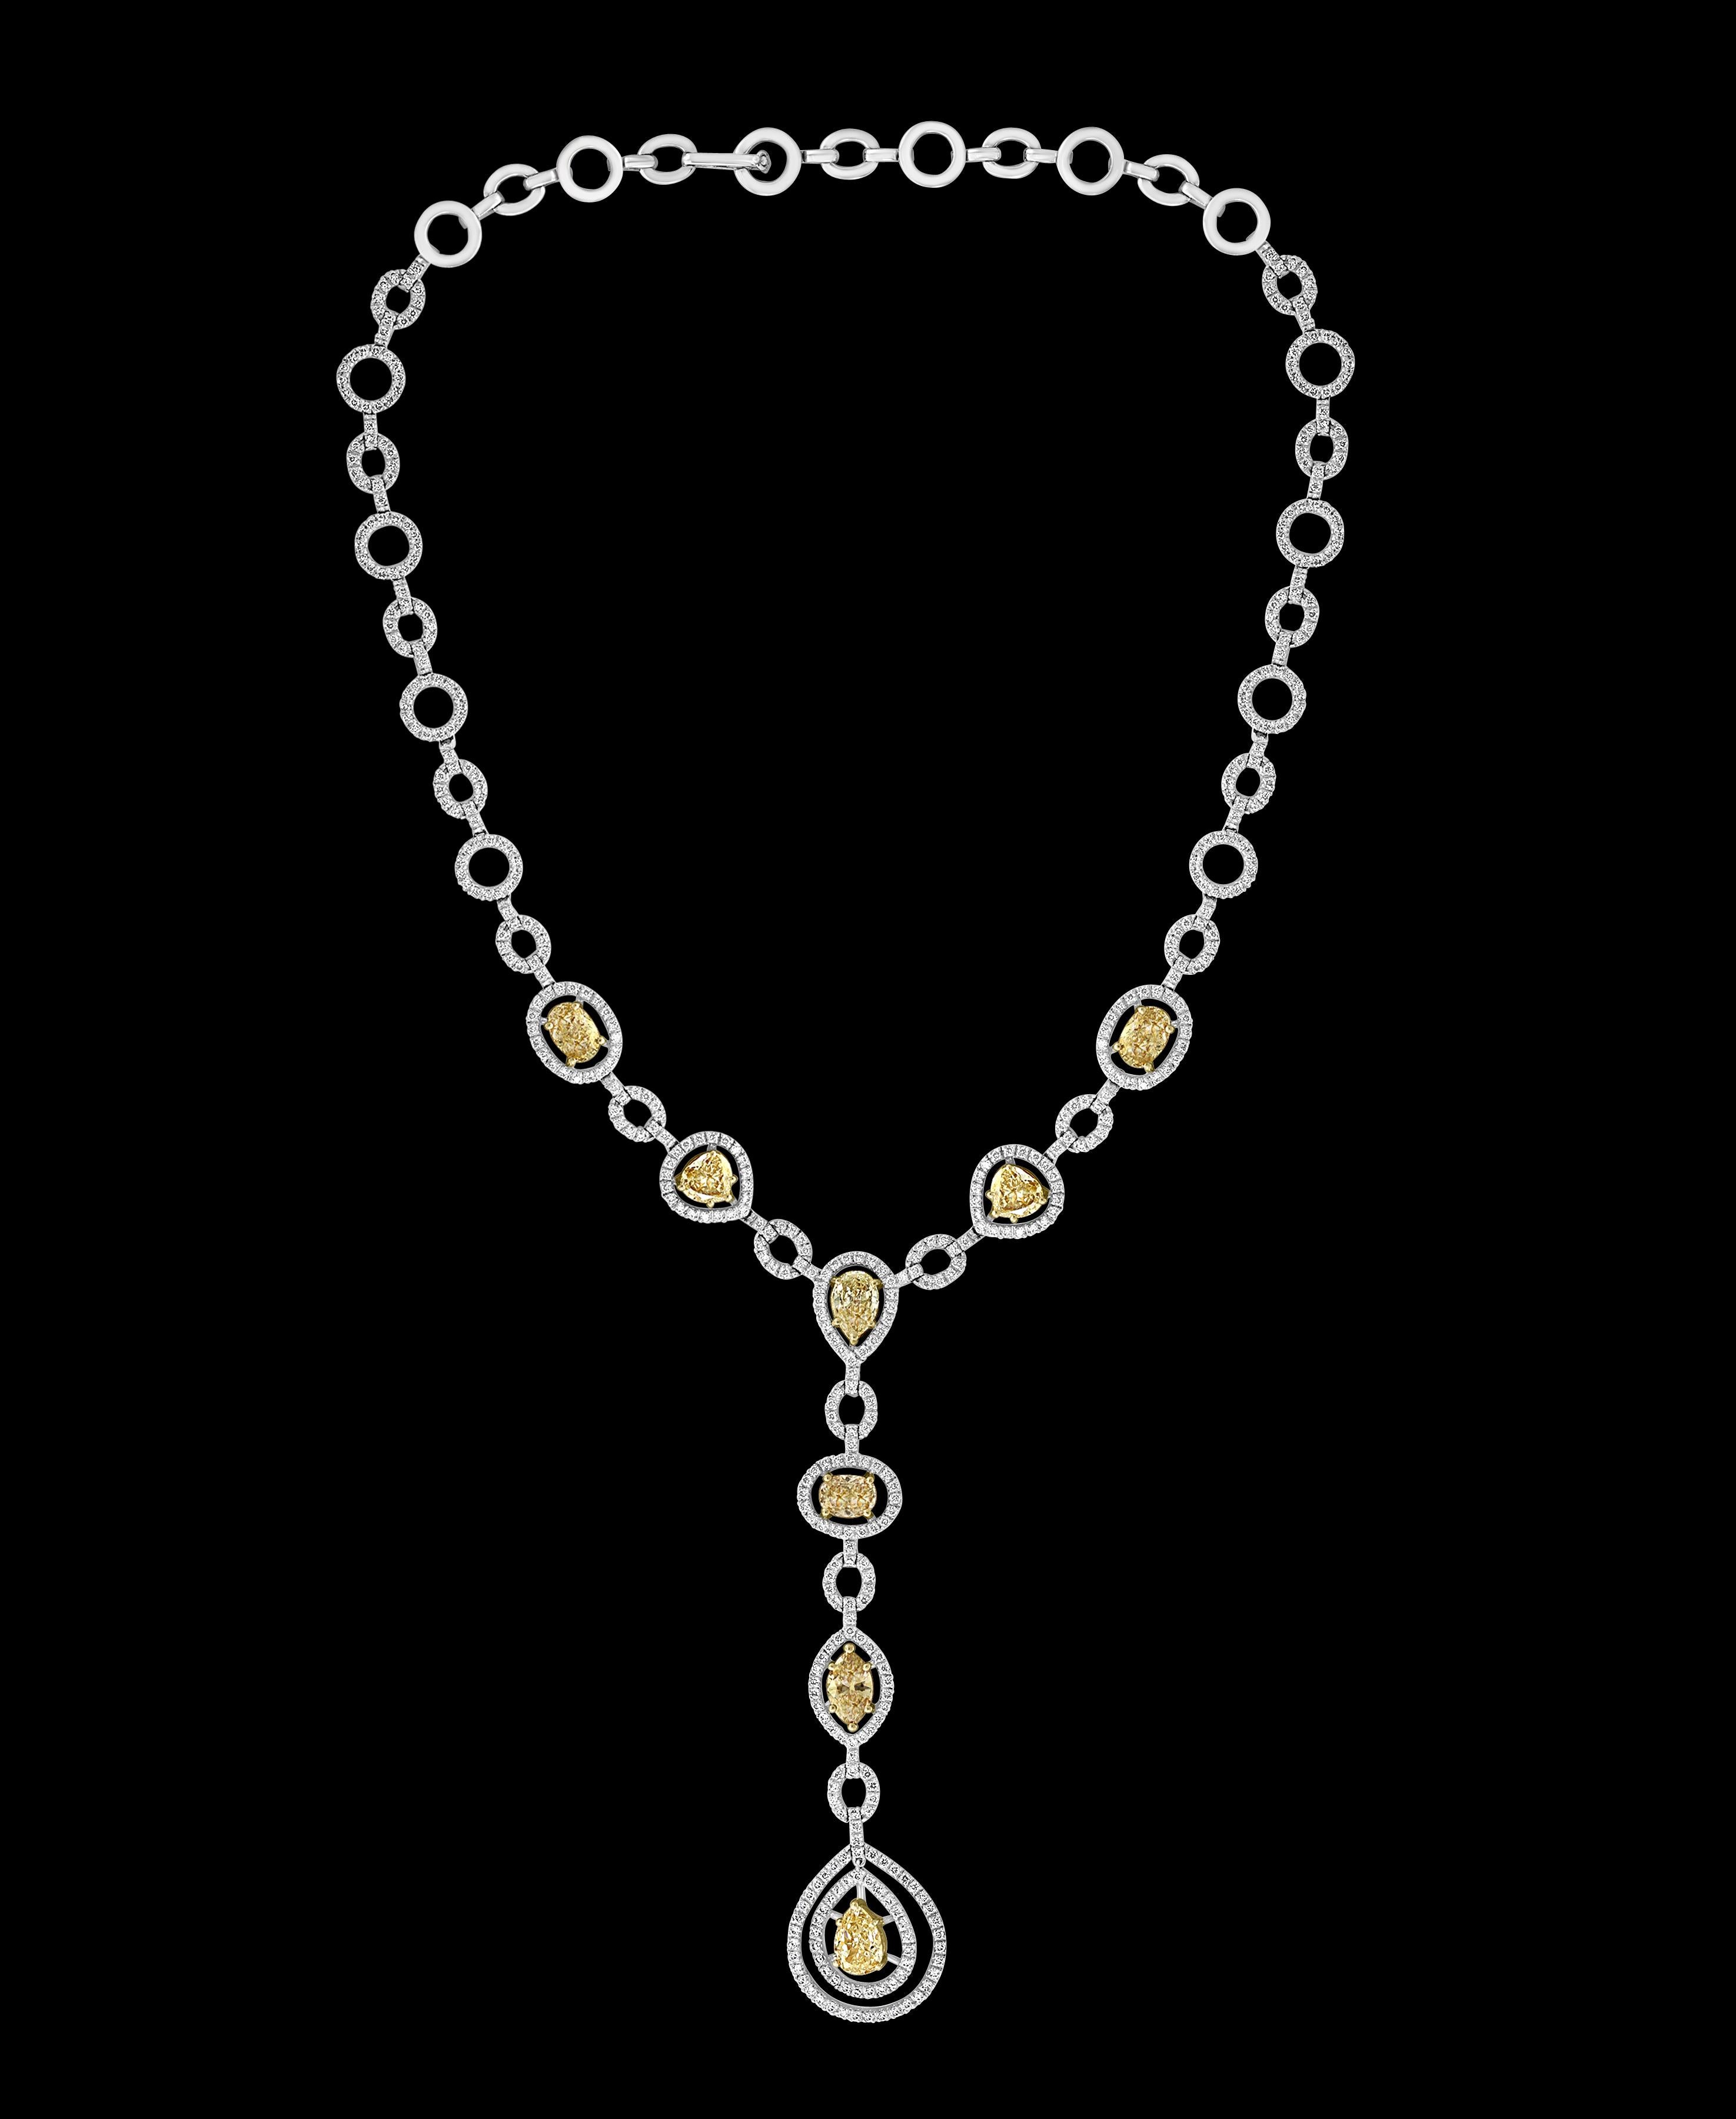 8 Yellow Solitaire Diamond and White Diamond Necklace 18 Karat White Gold In Excellent Condition For Sale In New York, NY